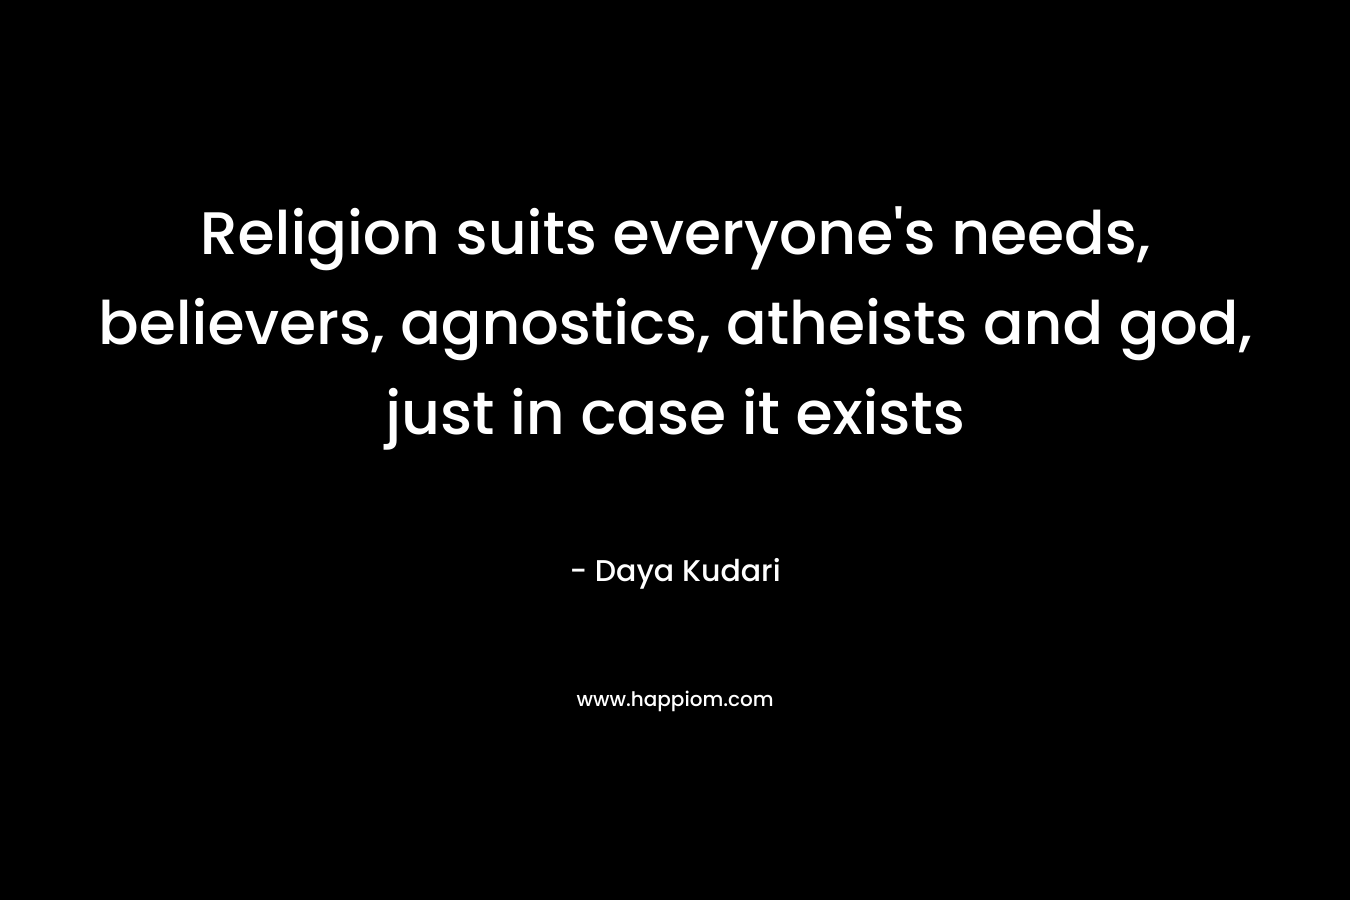 Religion suits everyone’s needs, believers, agnostics, atheists and god, just in case it exists – Daya Kudari